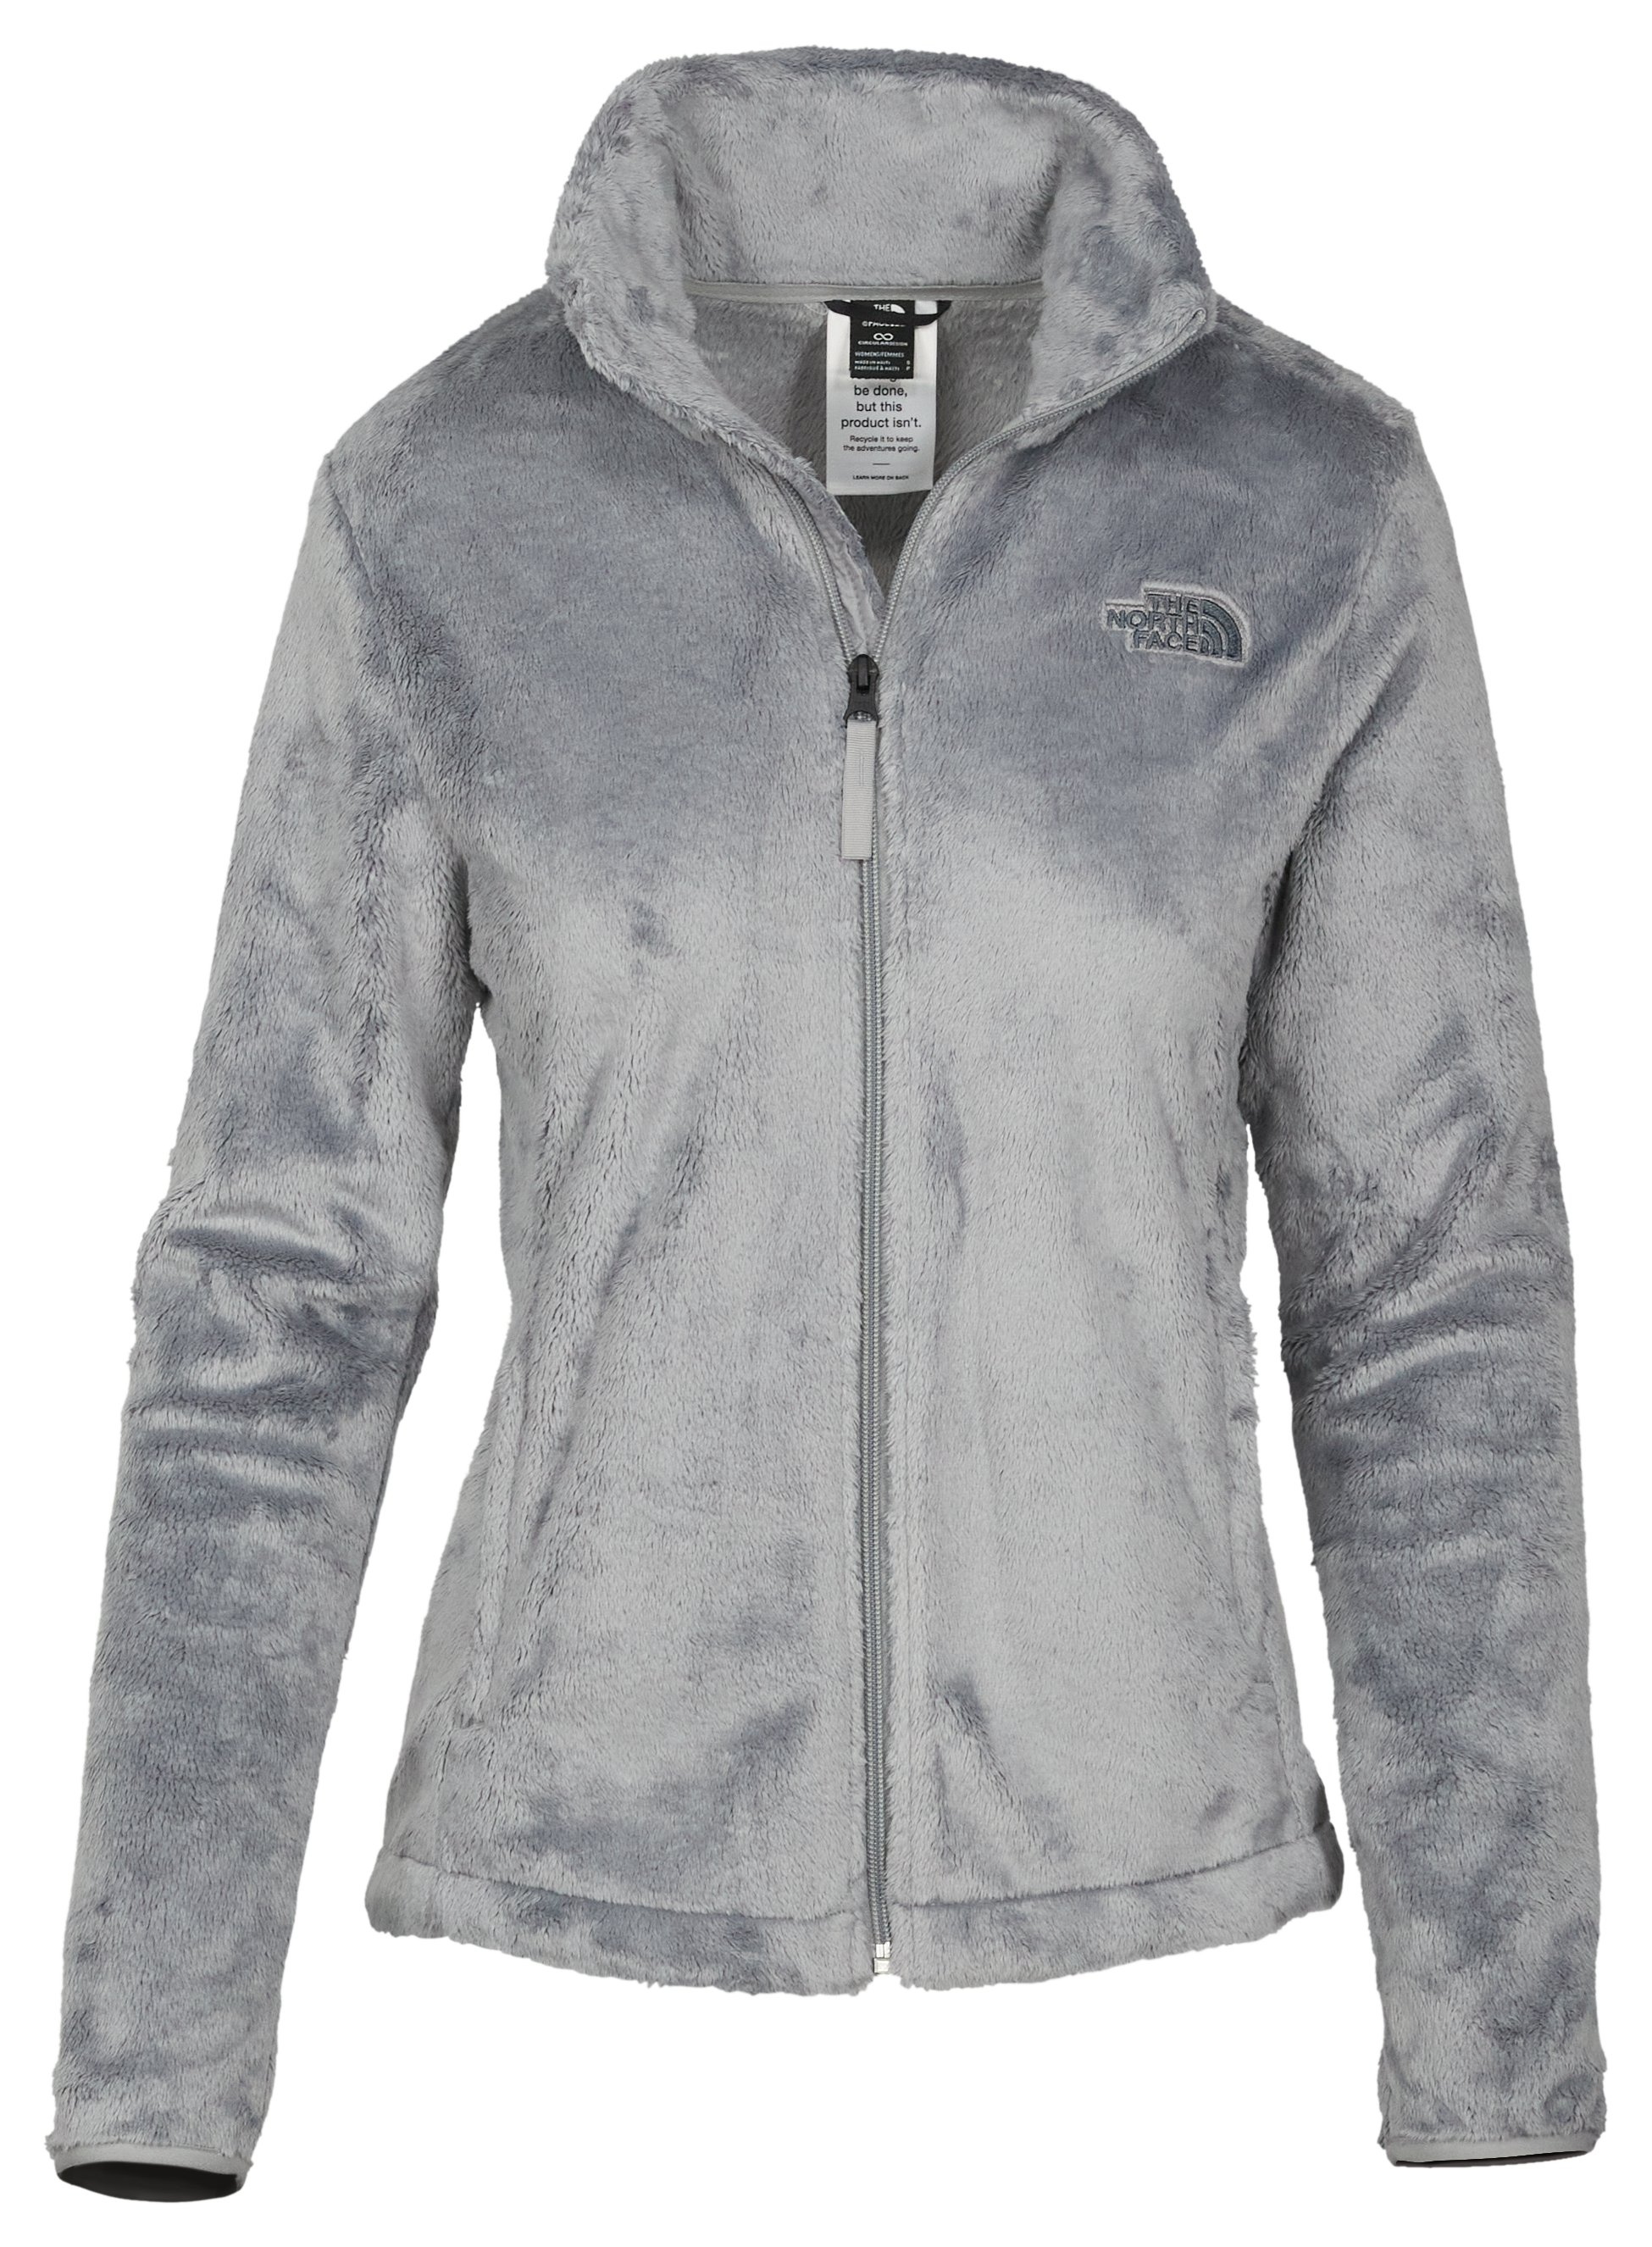 The North Face Osito Jacket for Ladies - Meld Grey - S